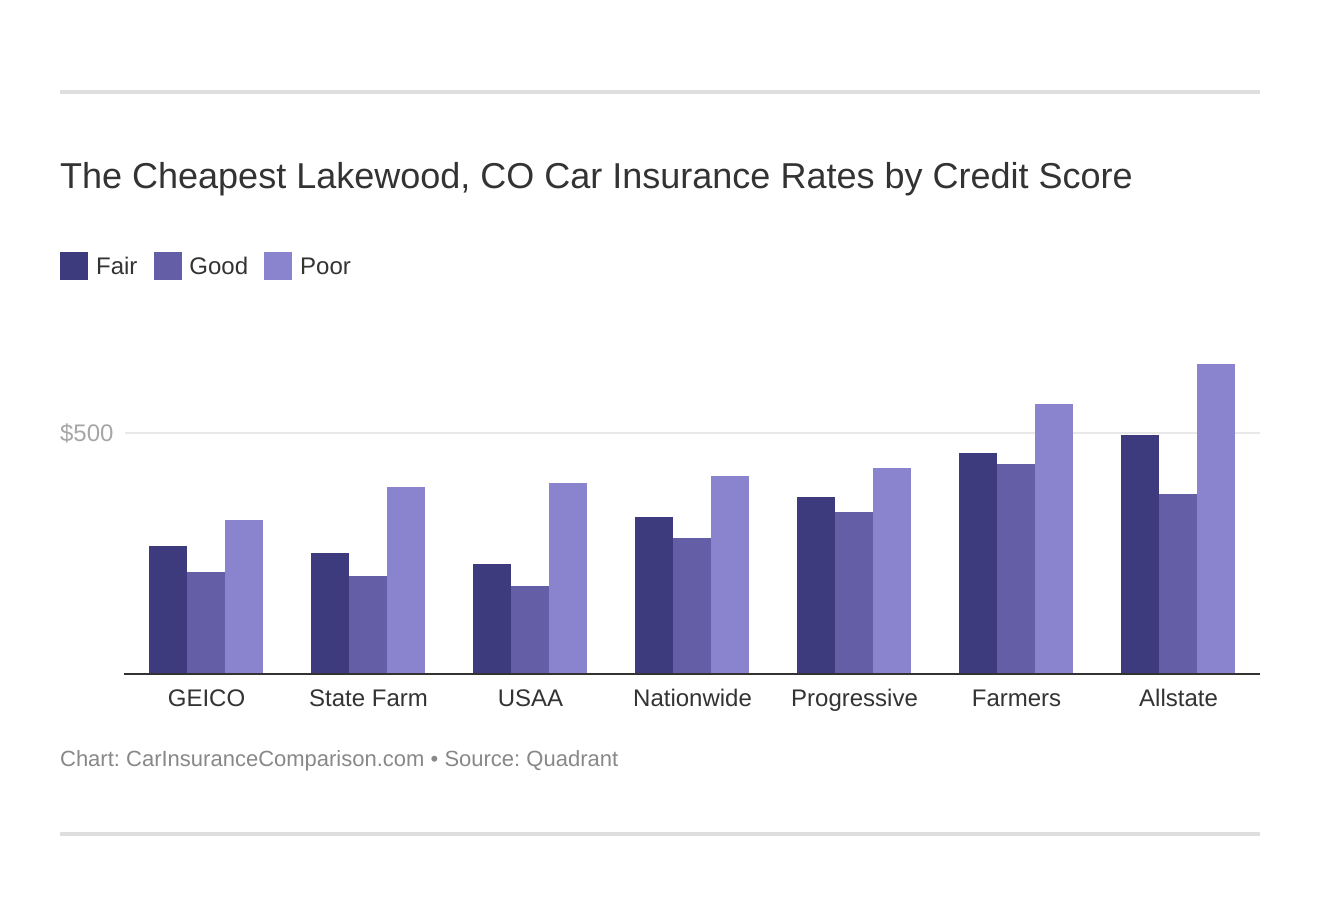 The Cheapest Lakewood, CO Car Insurance Rates by Credit Score